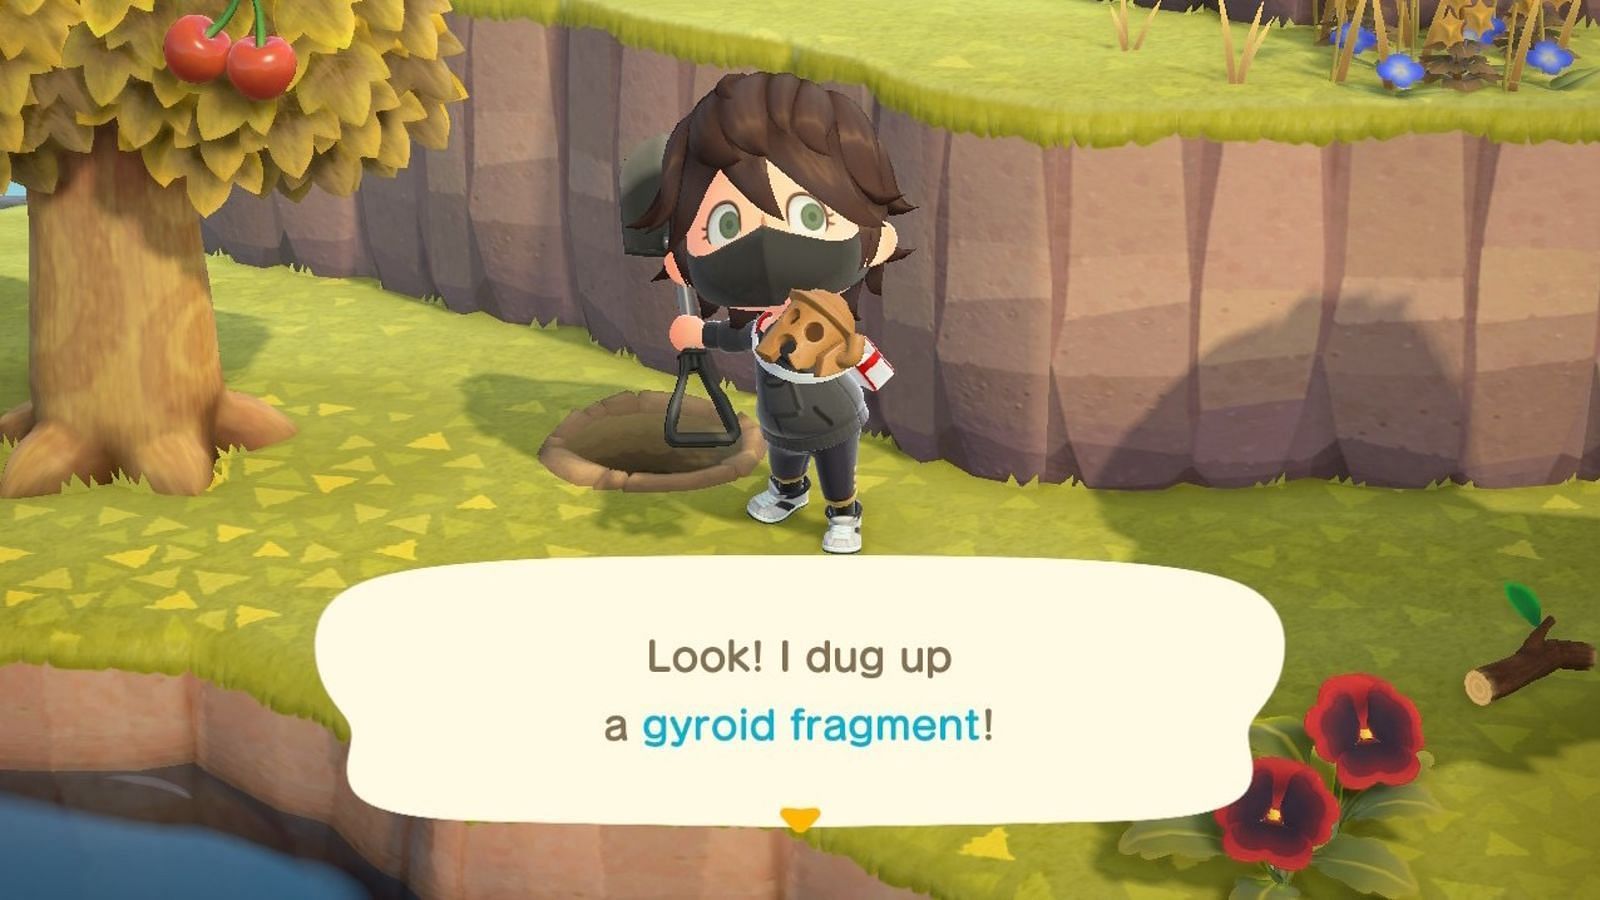 Gyroid fragments can be planted and will become a full Gyroid (Image via Nintendo)